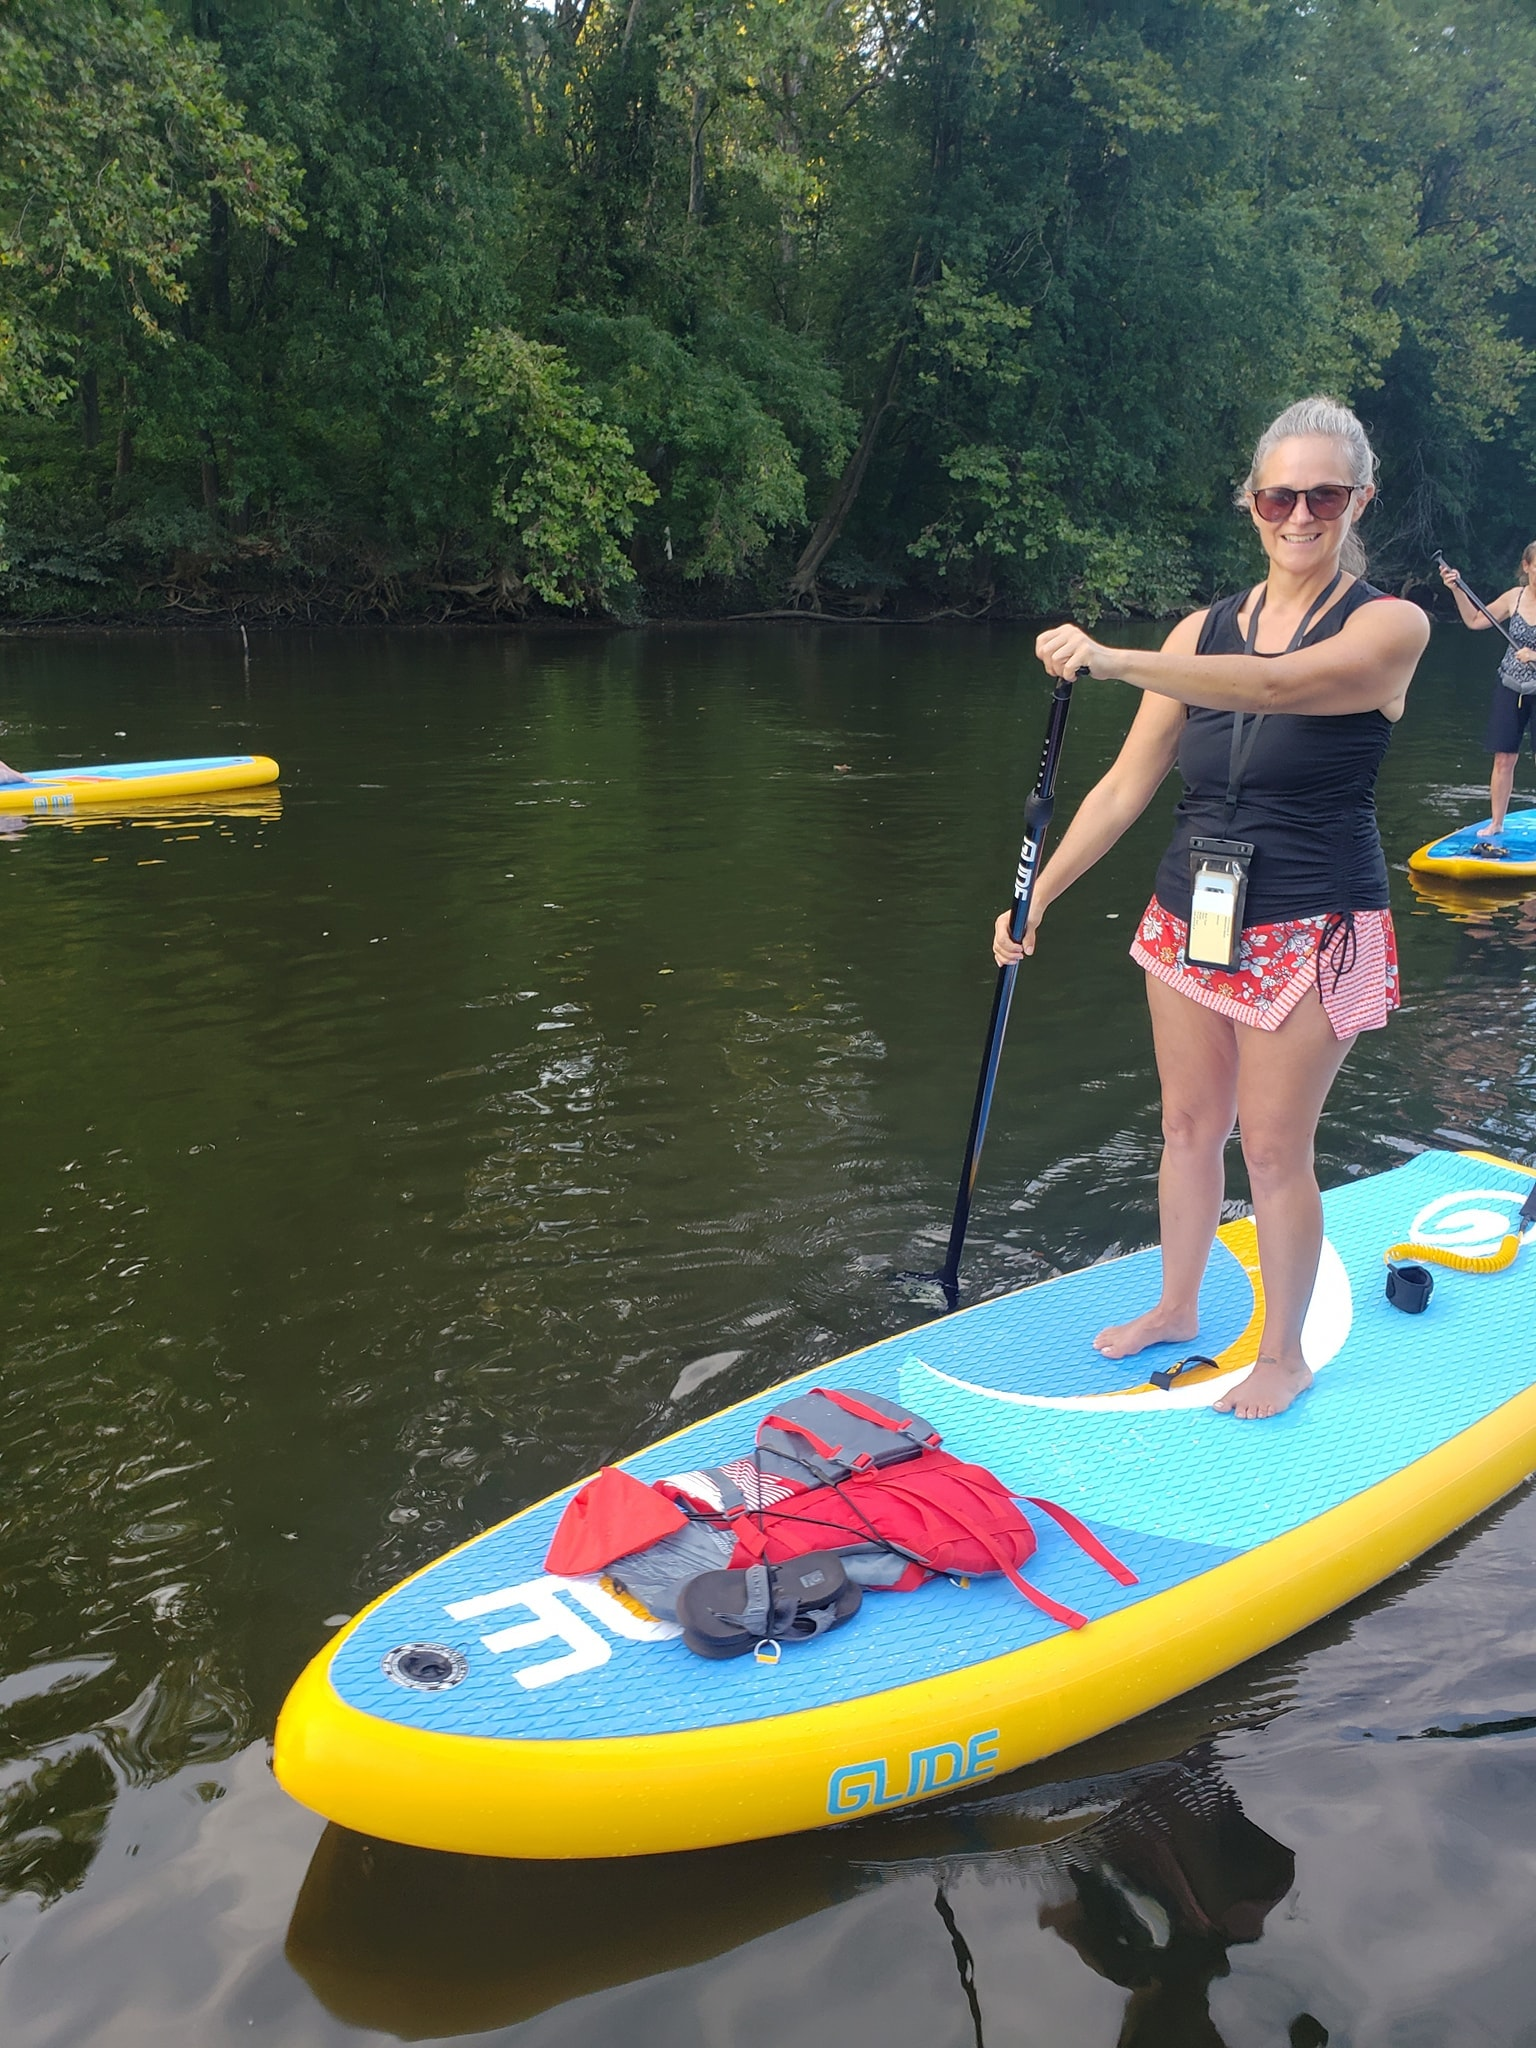 inflatable boards can be a touring board with kayak seat